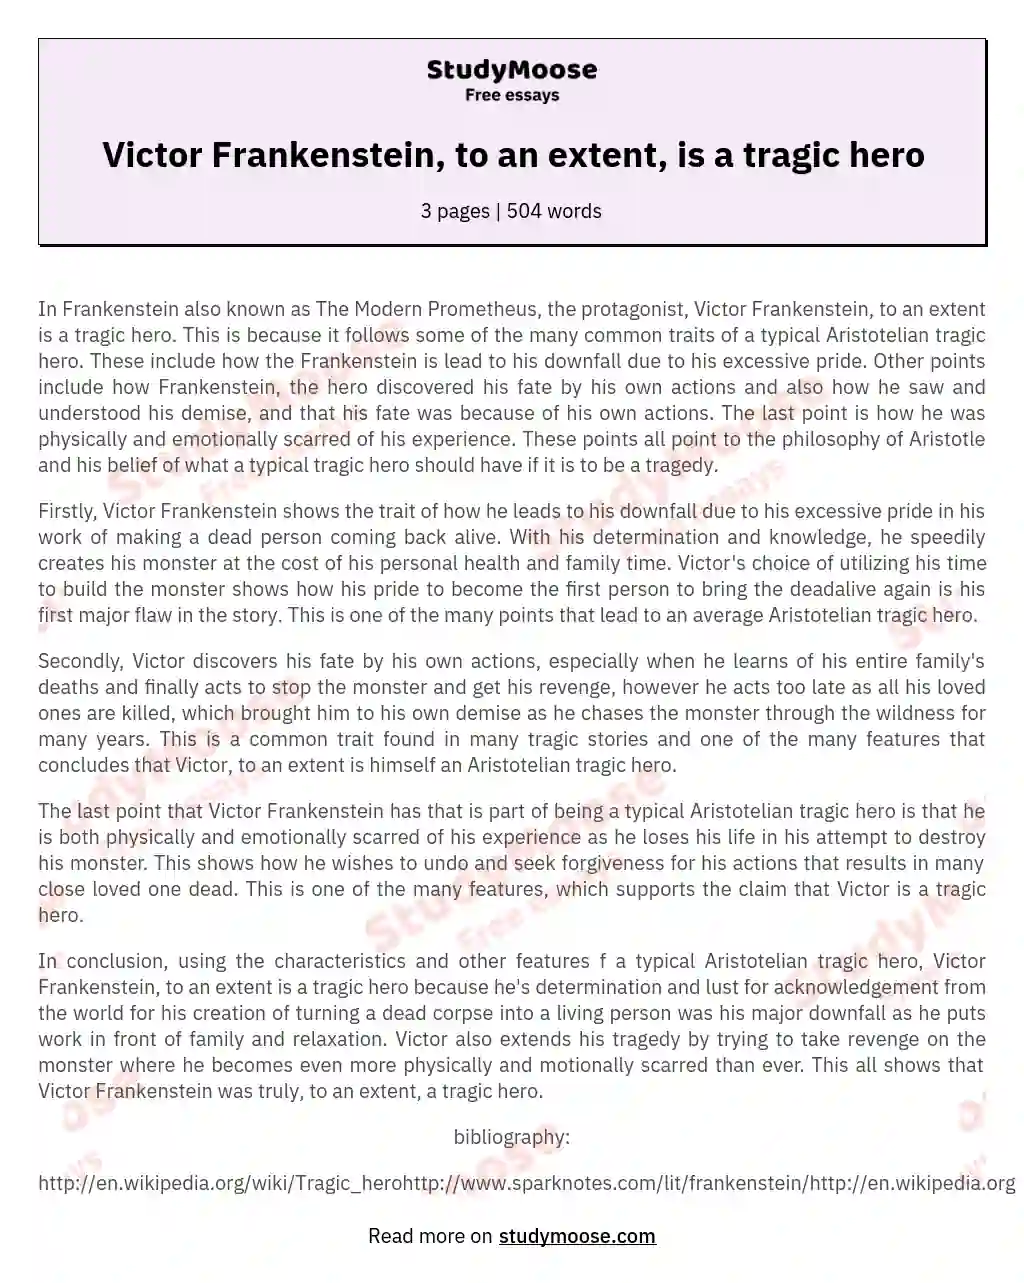 Victor Frankenstein, to an extent, is a tragic hero